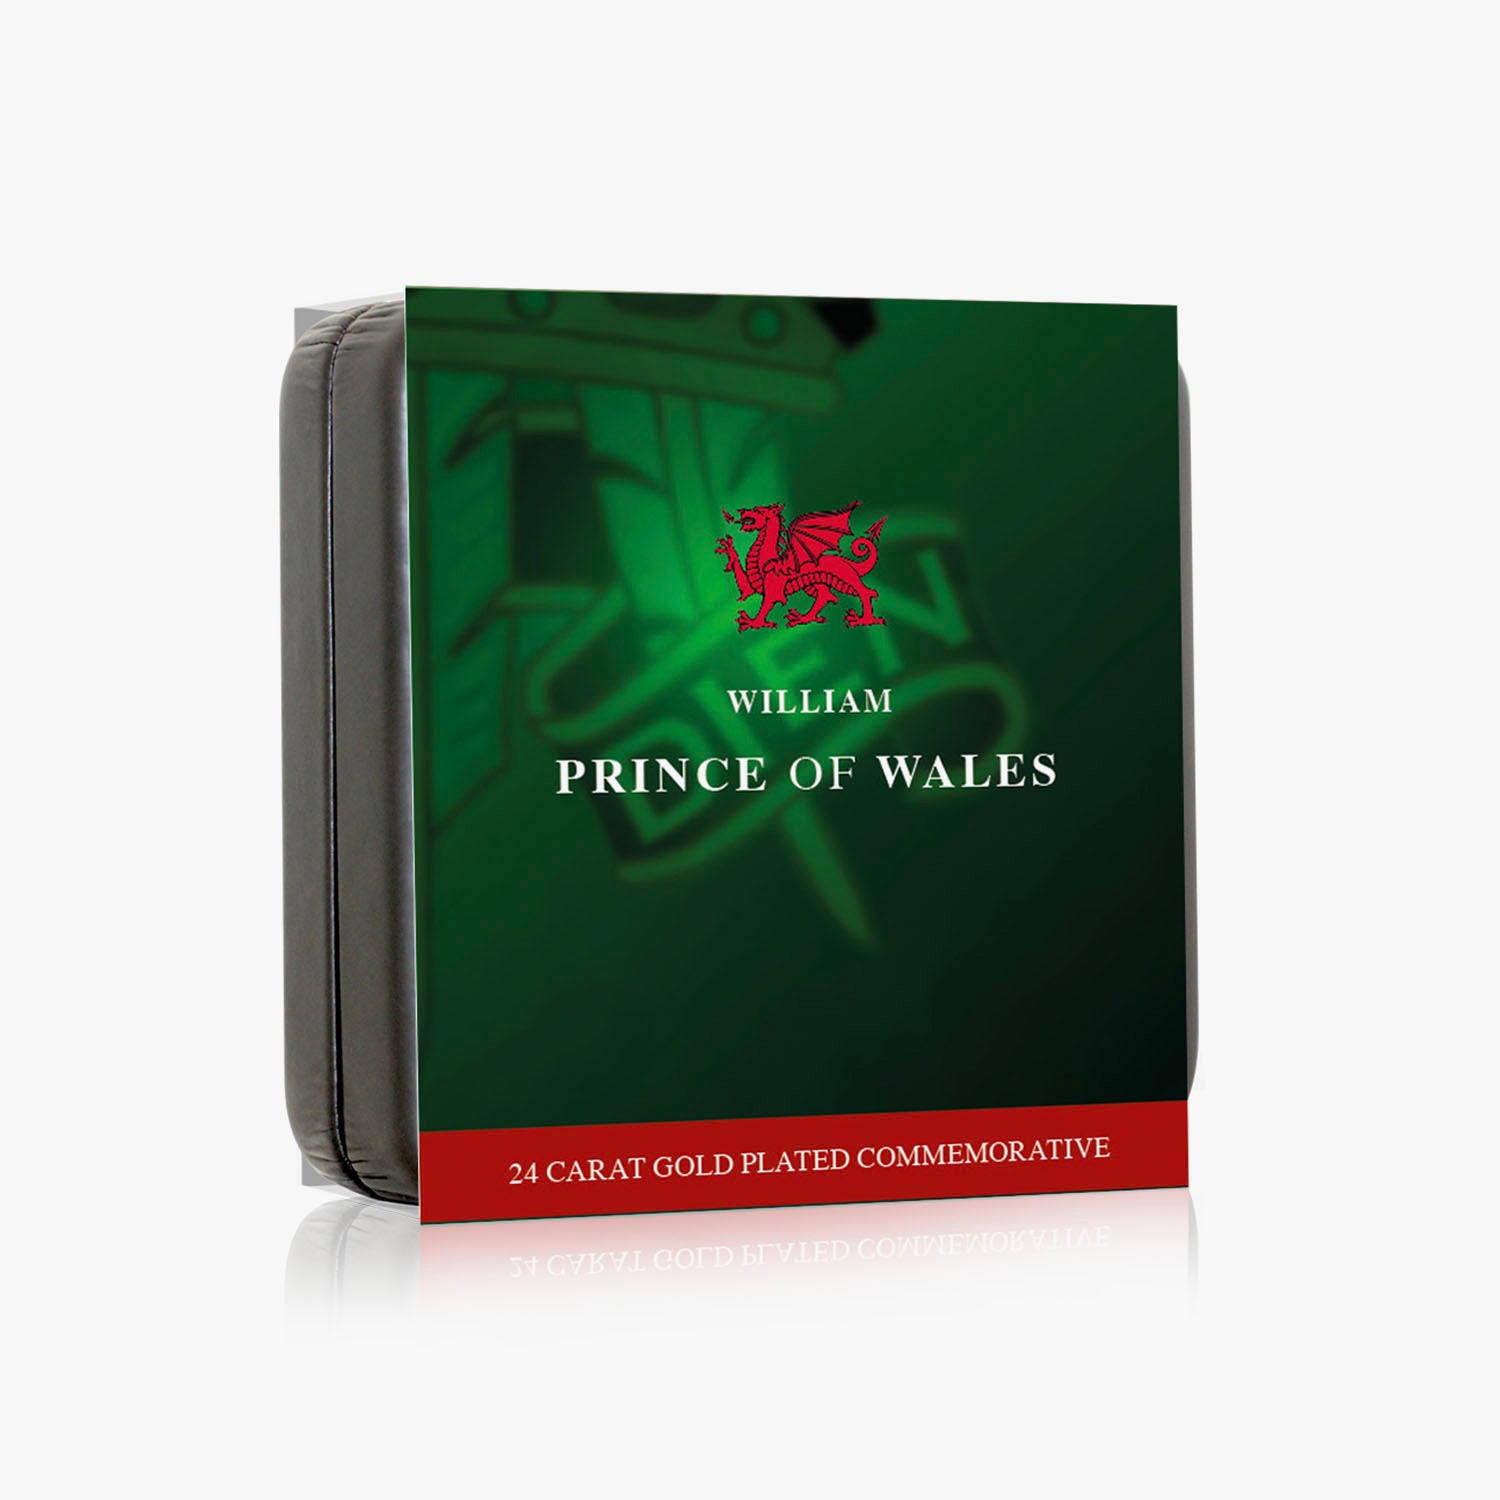 William - The Prince of Wales Gold Plated Commemorative